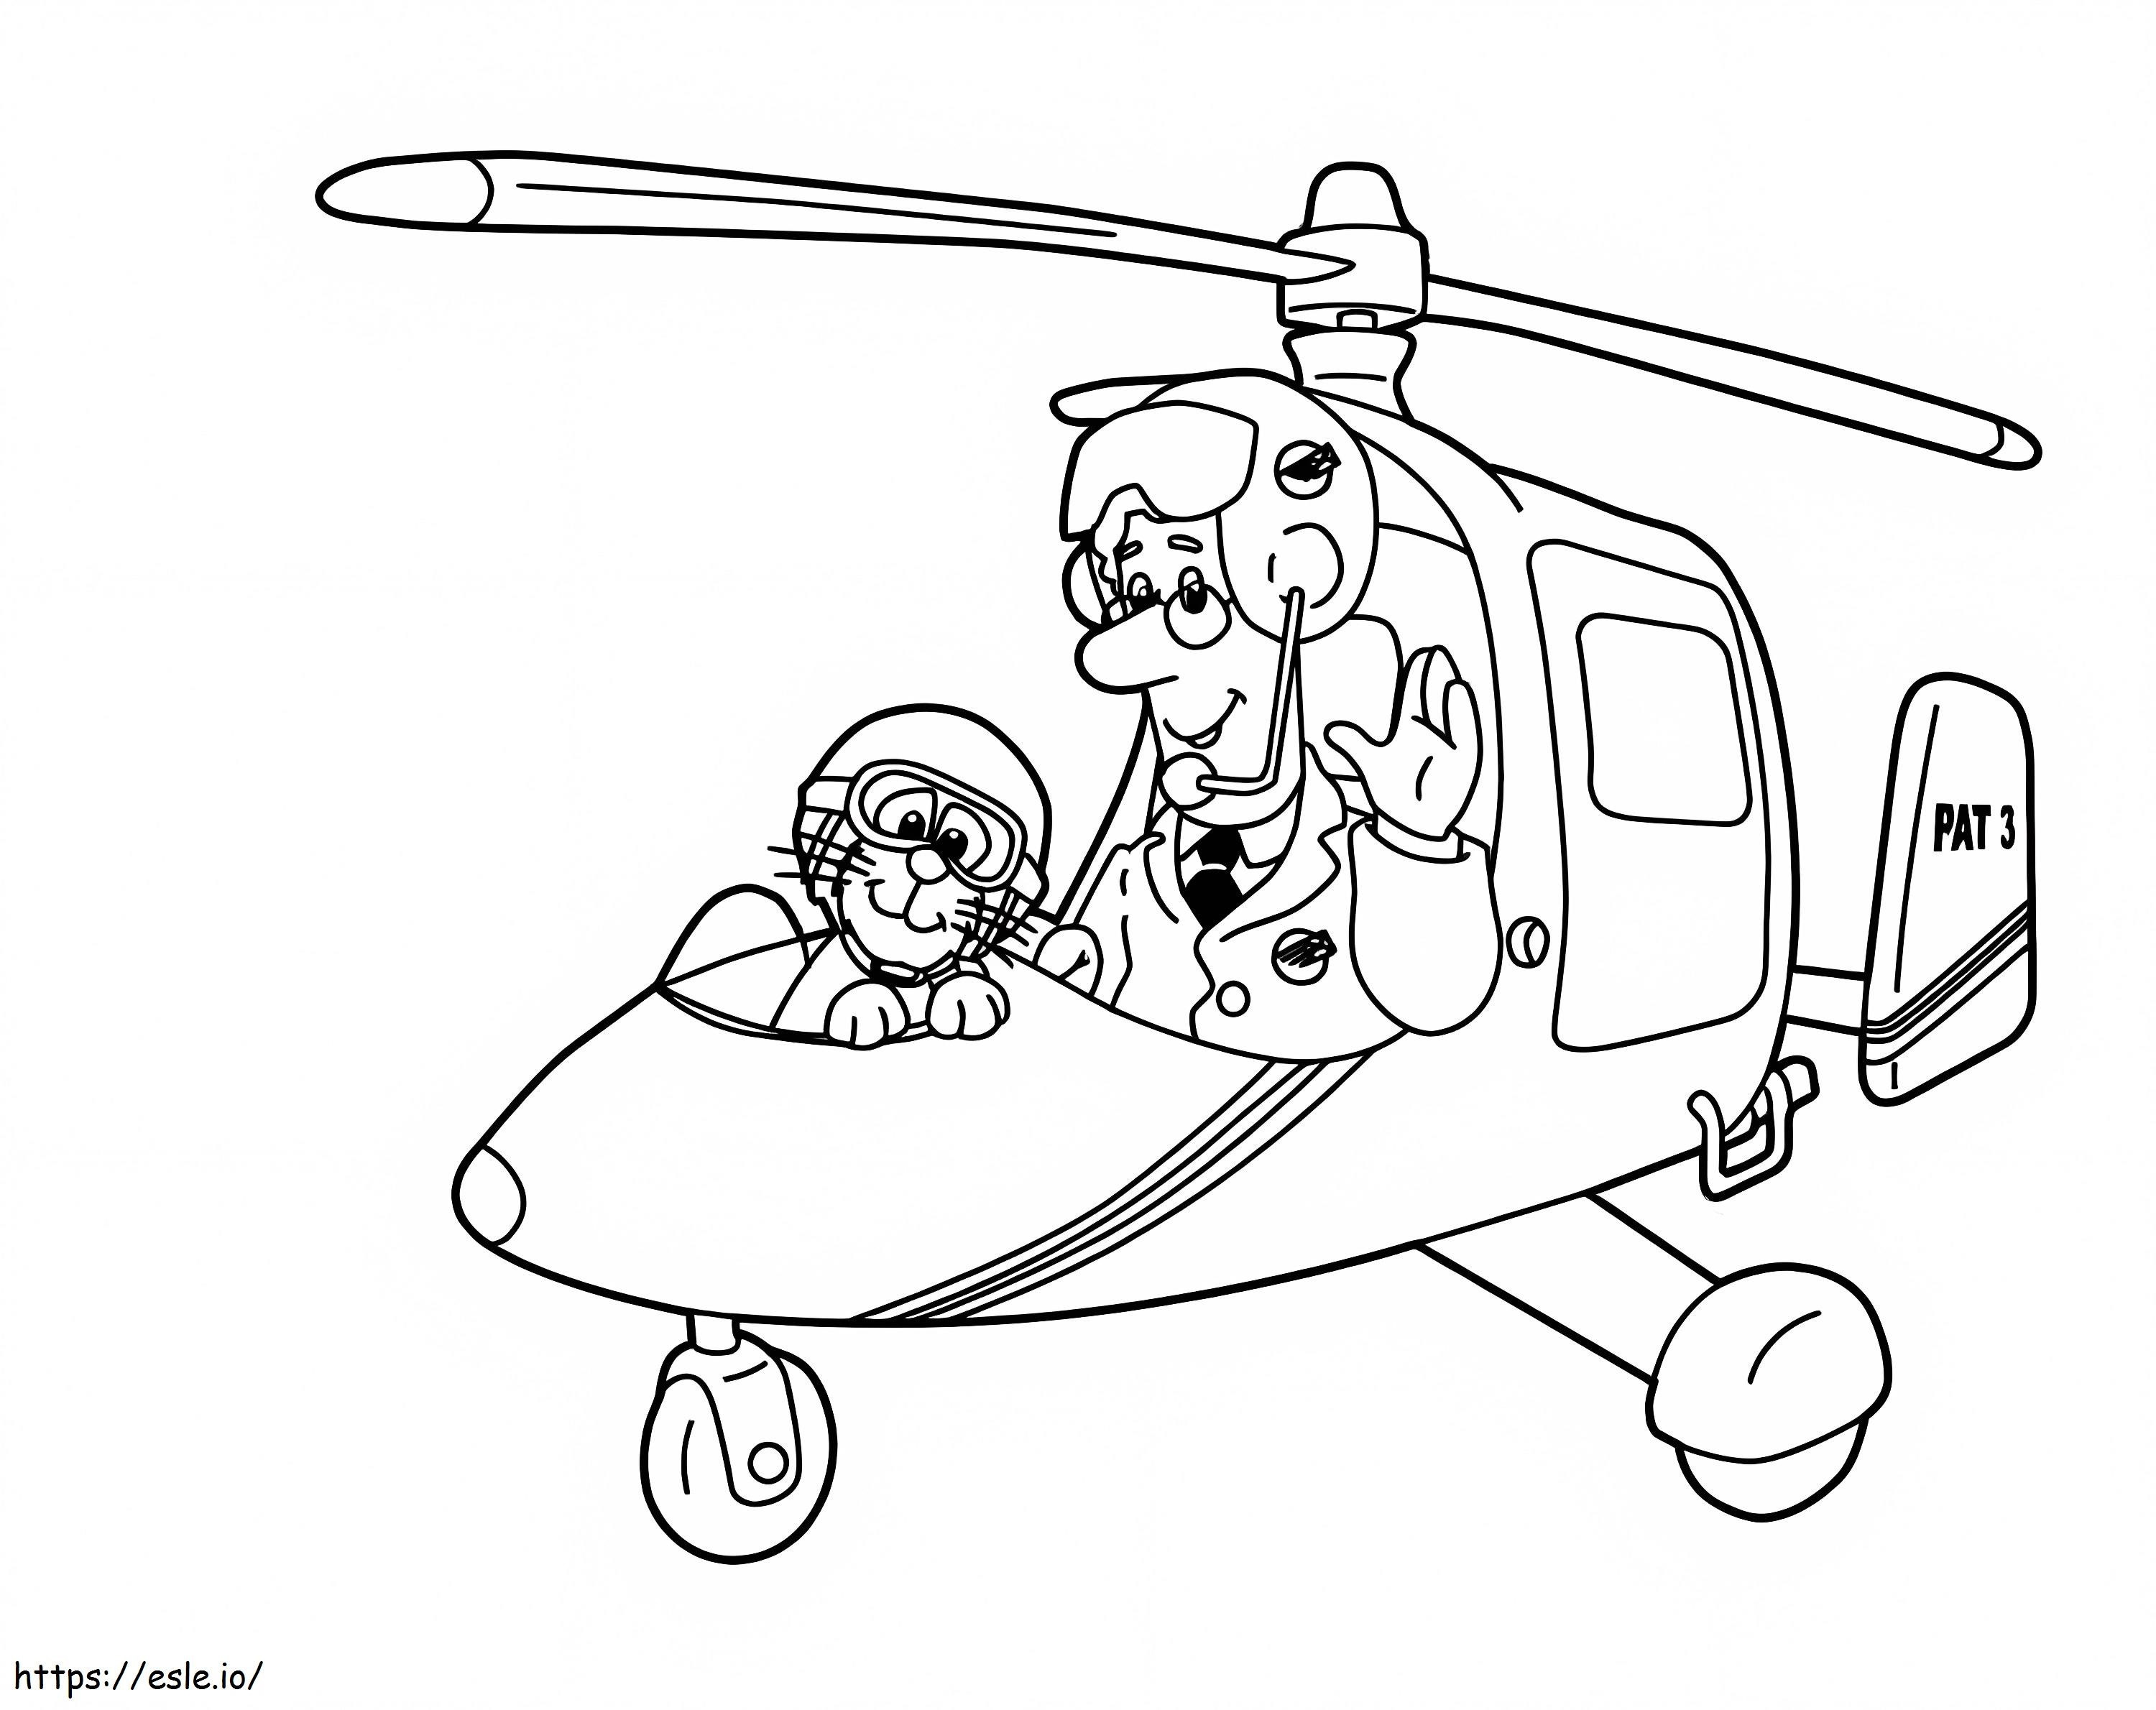 Postman Pat And His Cat In Helicopter coloring page